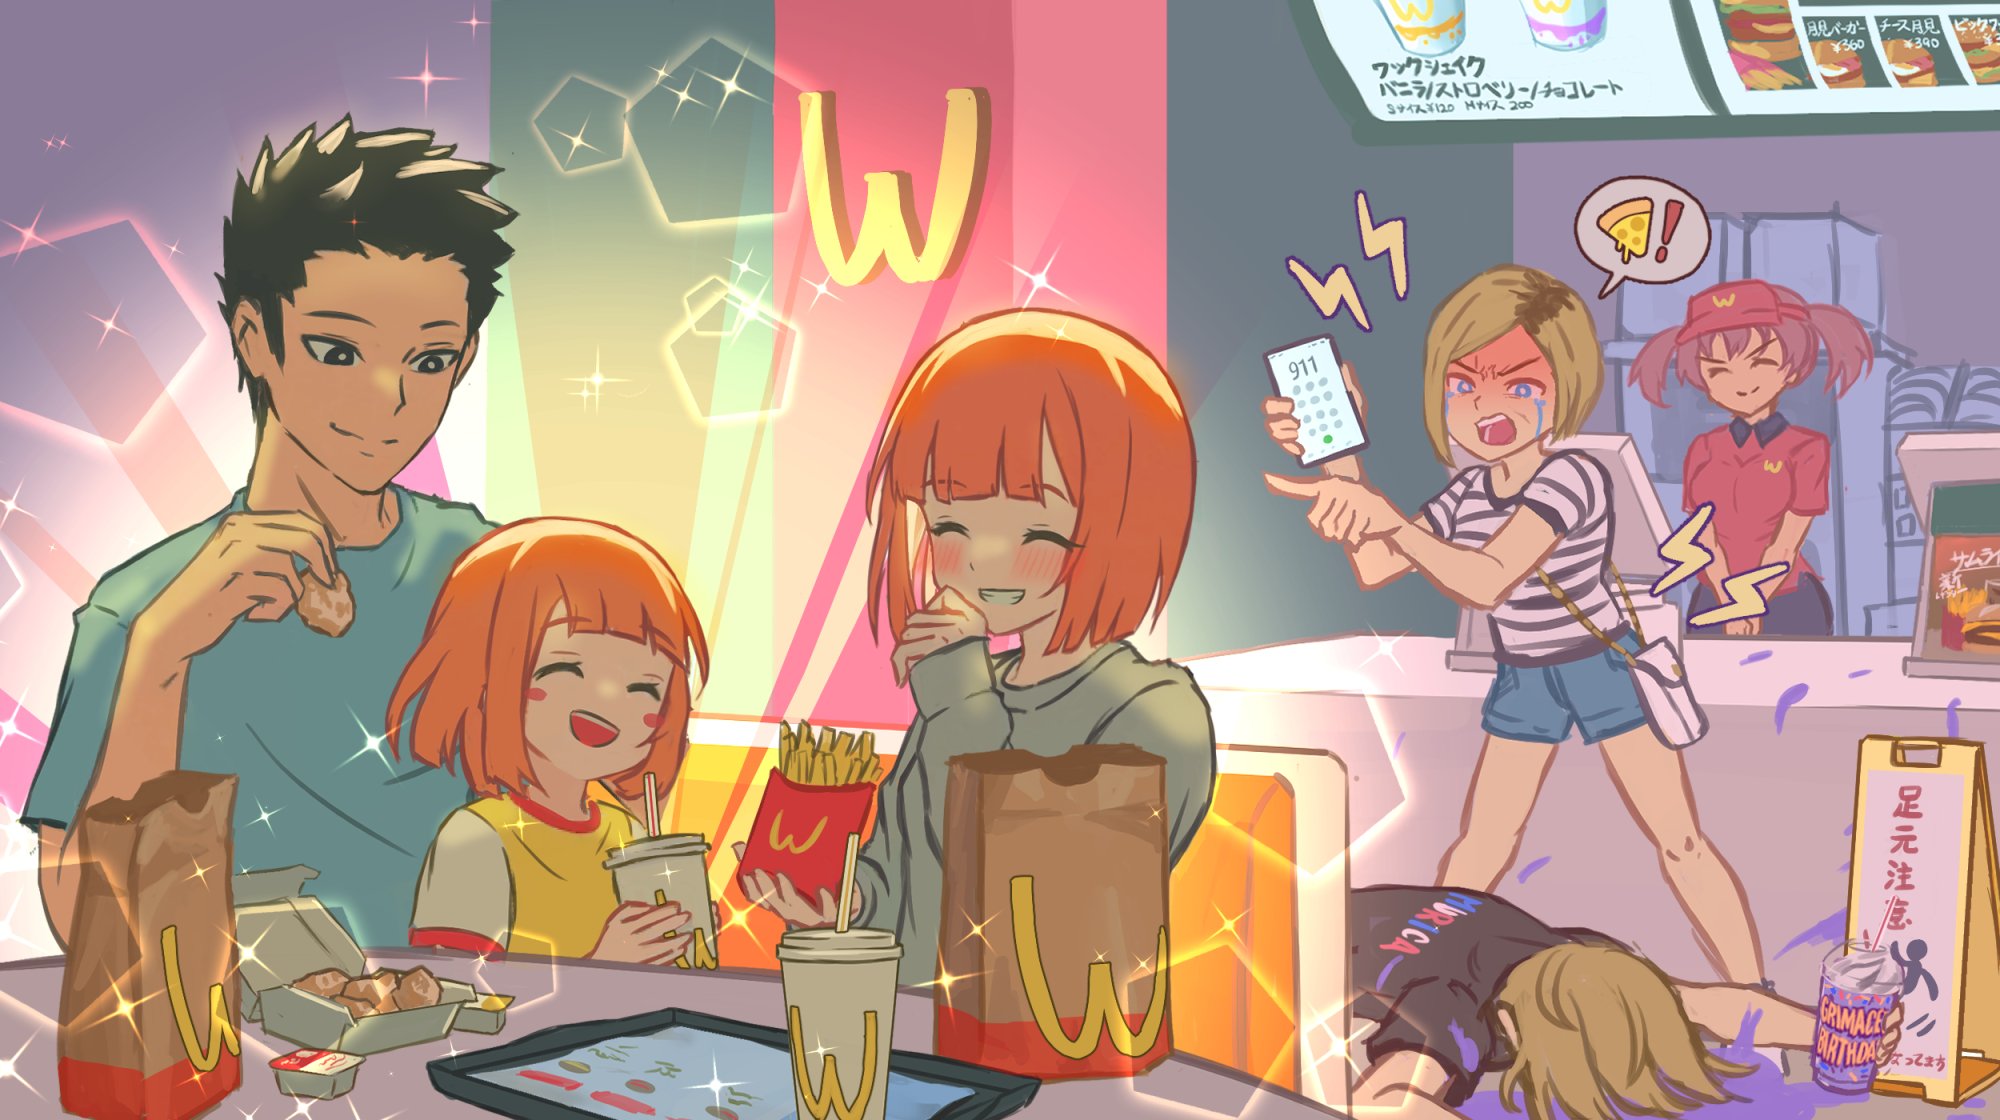 McDonald's Kickstarts New Campaign With Some In-Store Anime